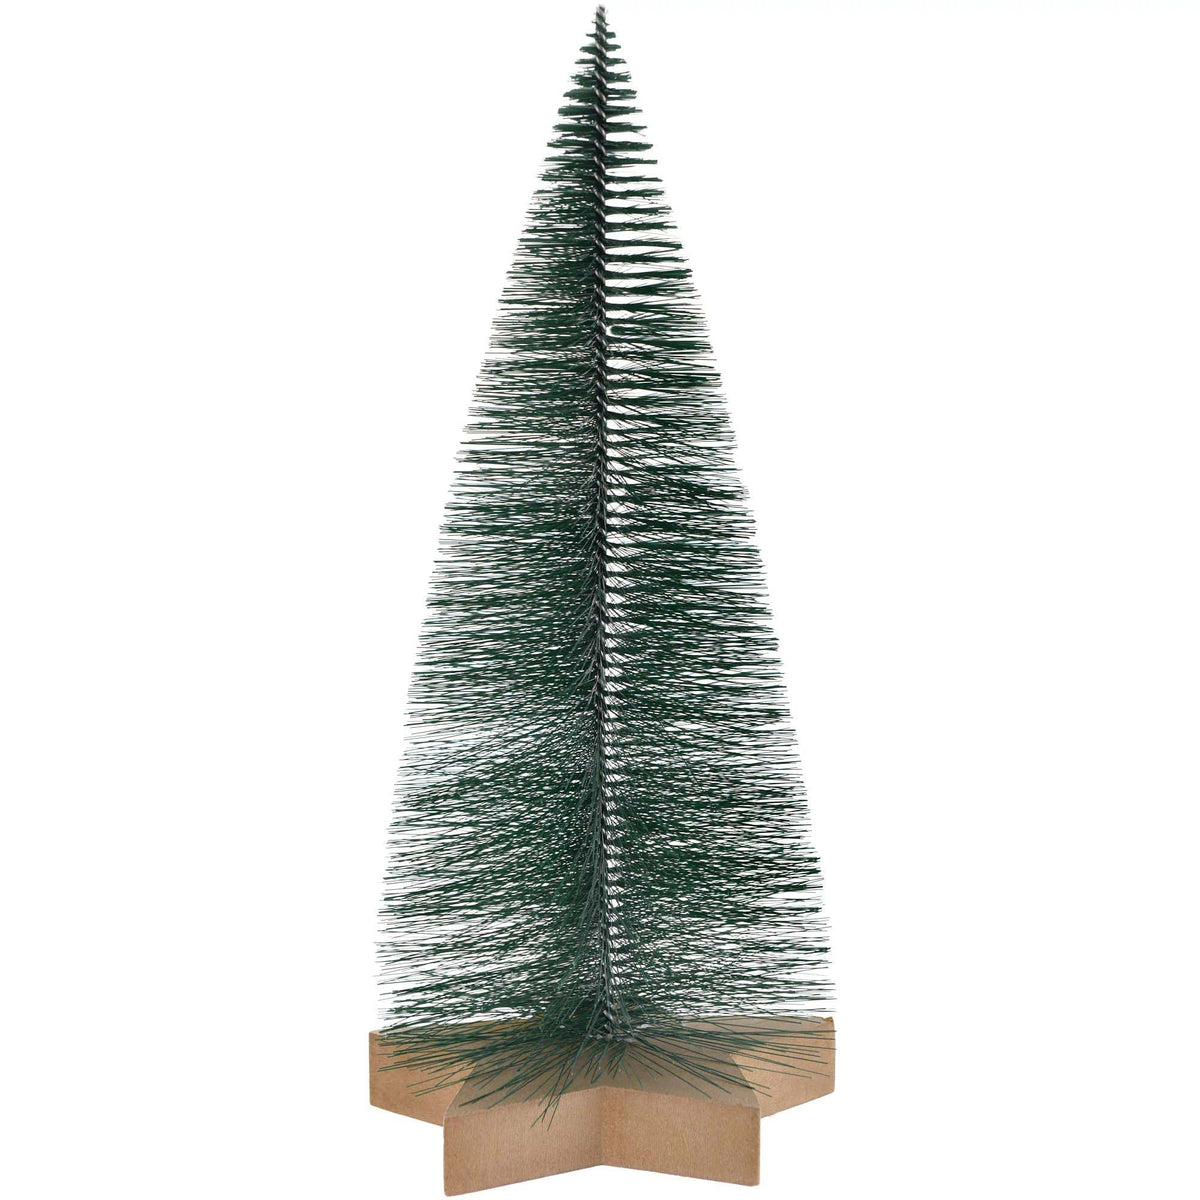 AMSCAN CA Christmas Christmas Tree Table Centerpiece, 14 Inches, 1 Count